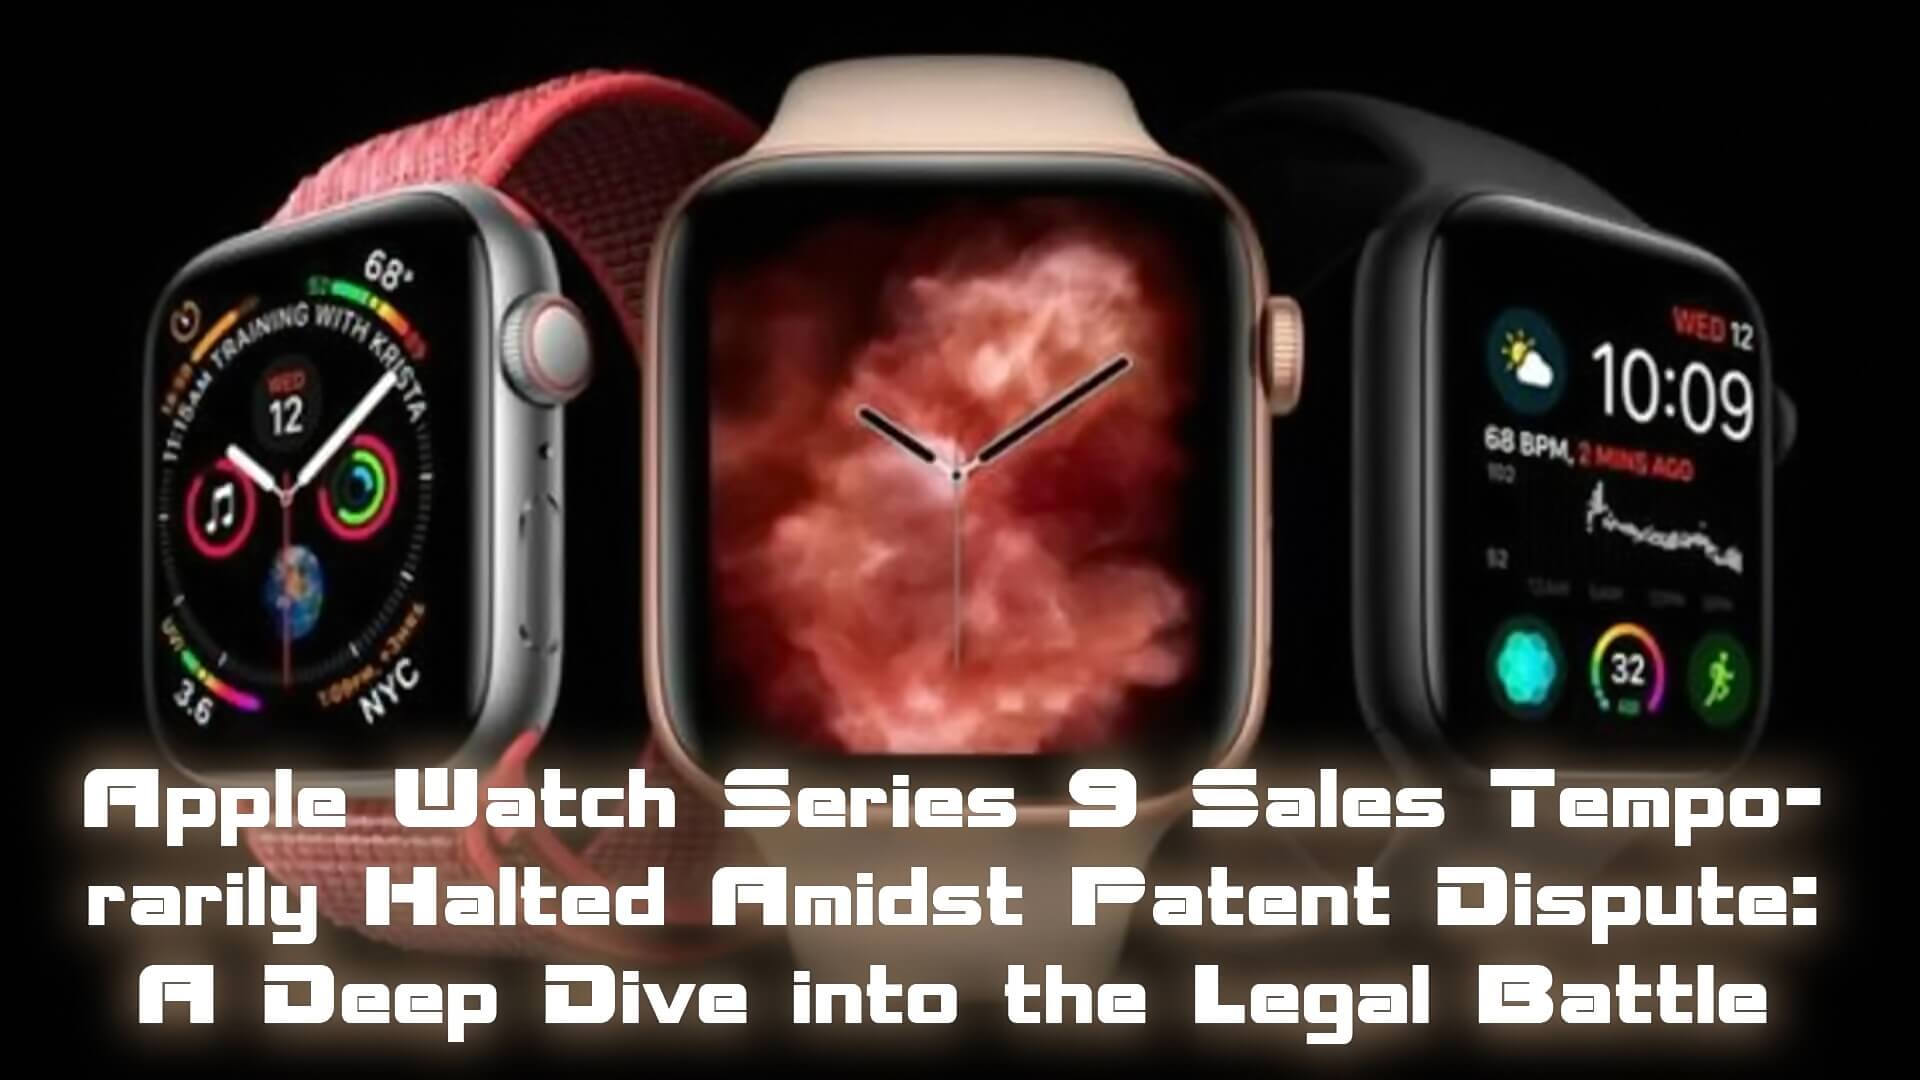 Apple Watch Series 9 Sales Temporarily Halted Amidst Patent Dispute